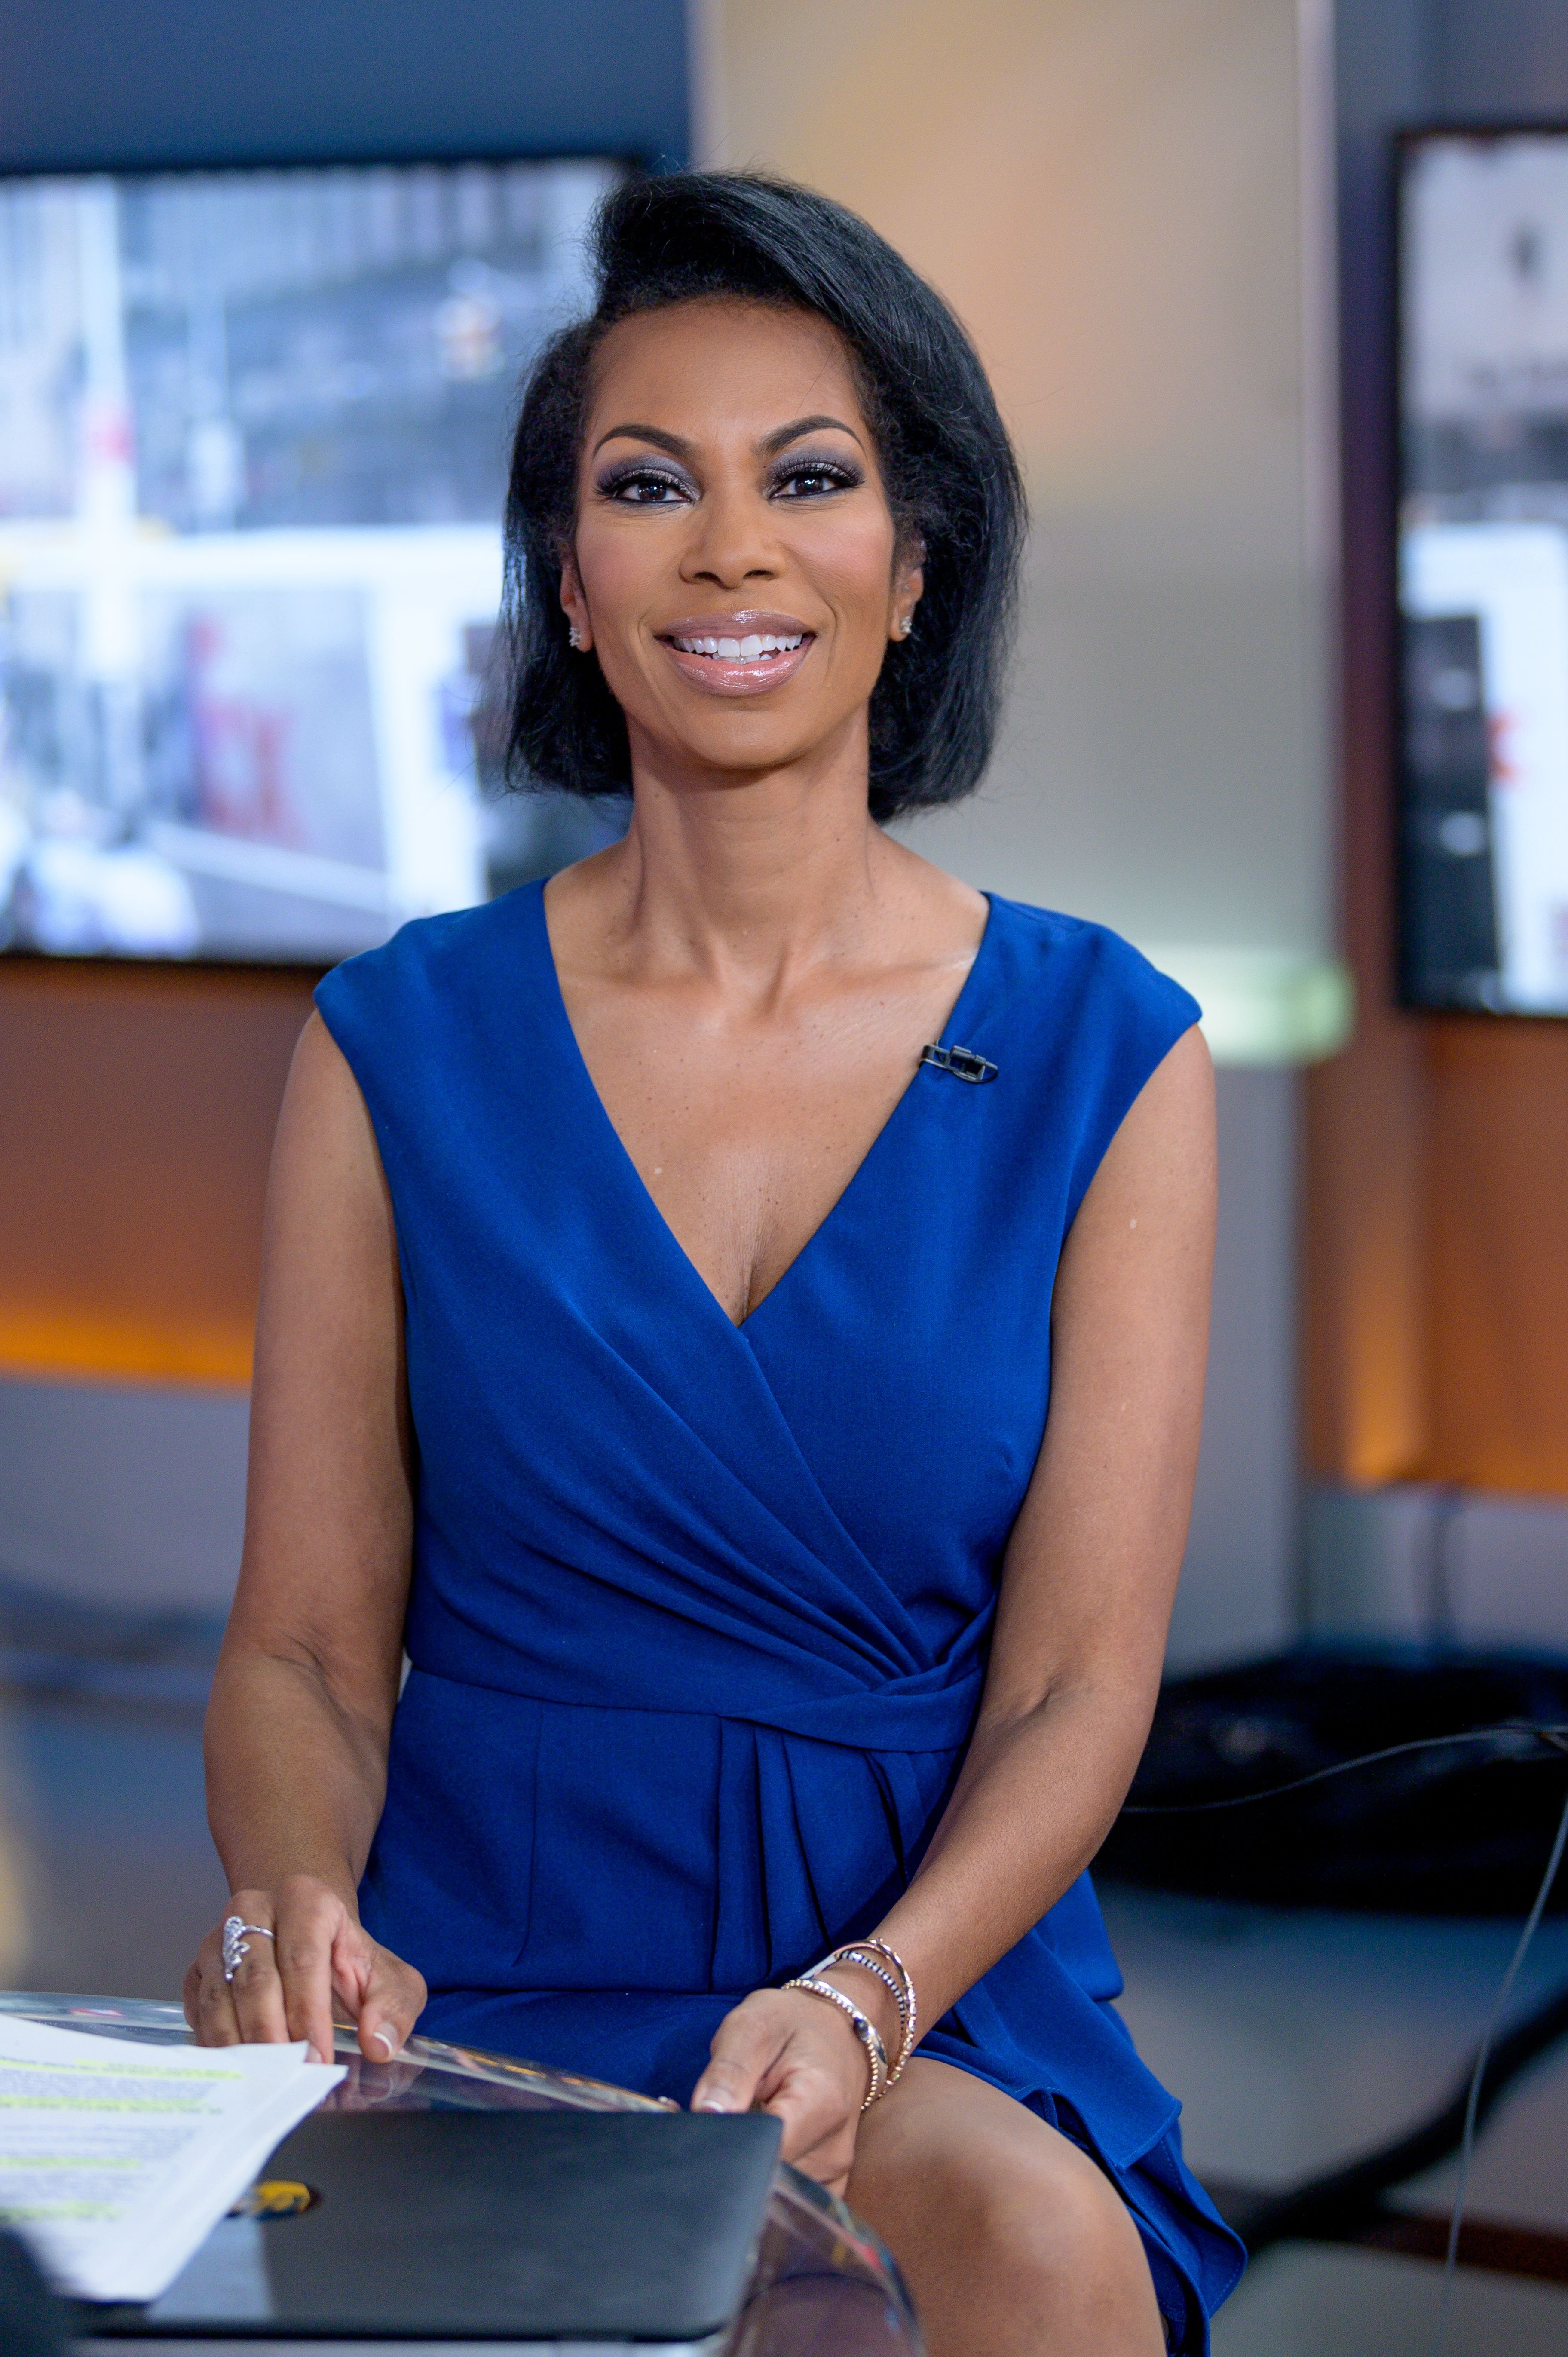 Harris Faulkner at the Fox News Channel Studios on September 18, 2019 in New York. │Photo: Getty Images